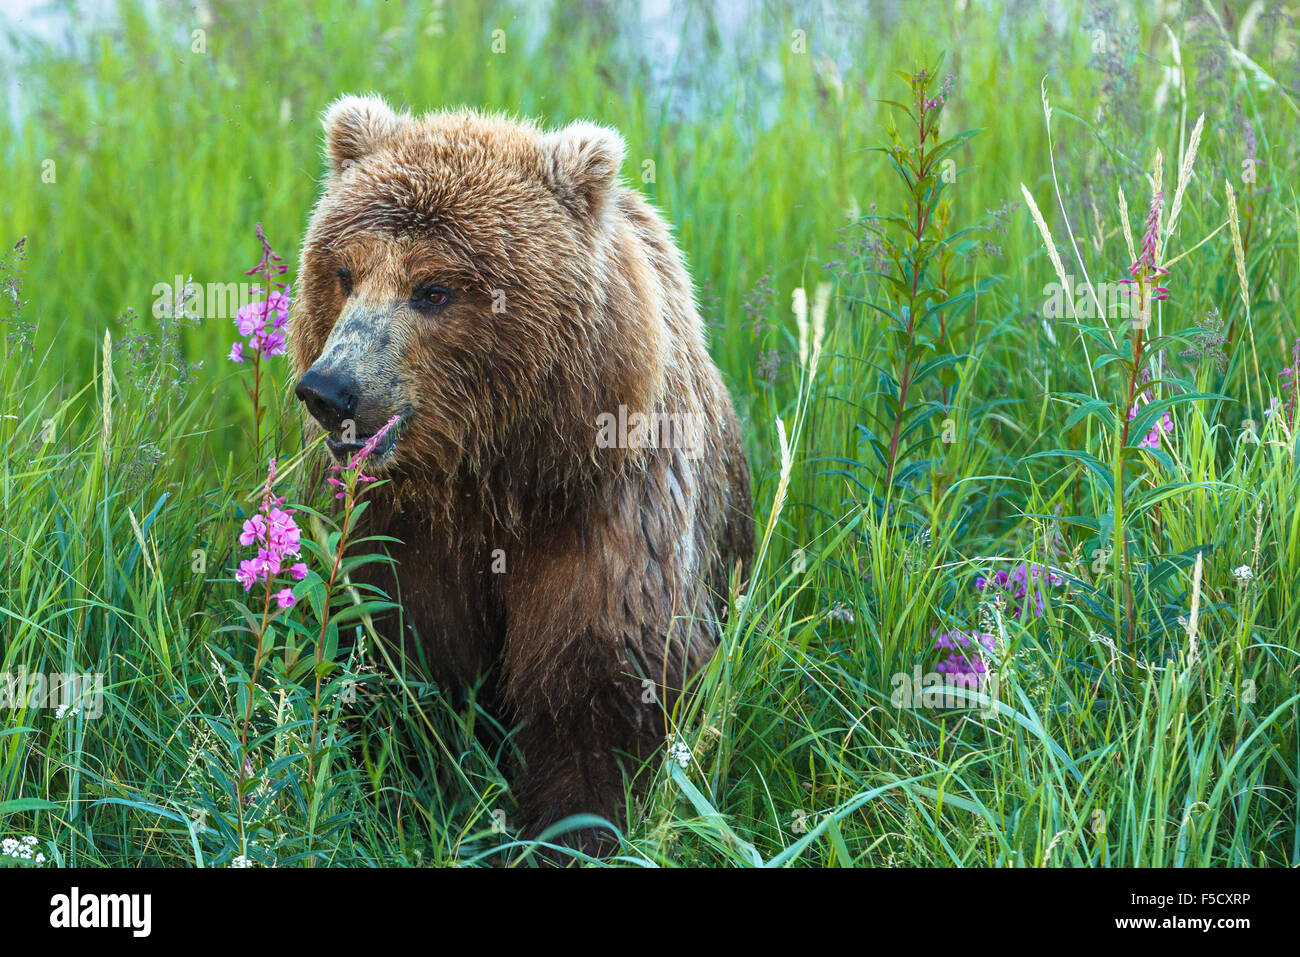 A brown bear looking by Brooks River, Katmai National Park, Alaska, United States of America. Stock Photo